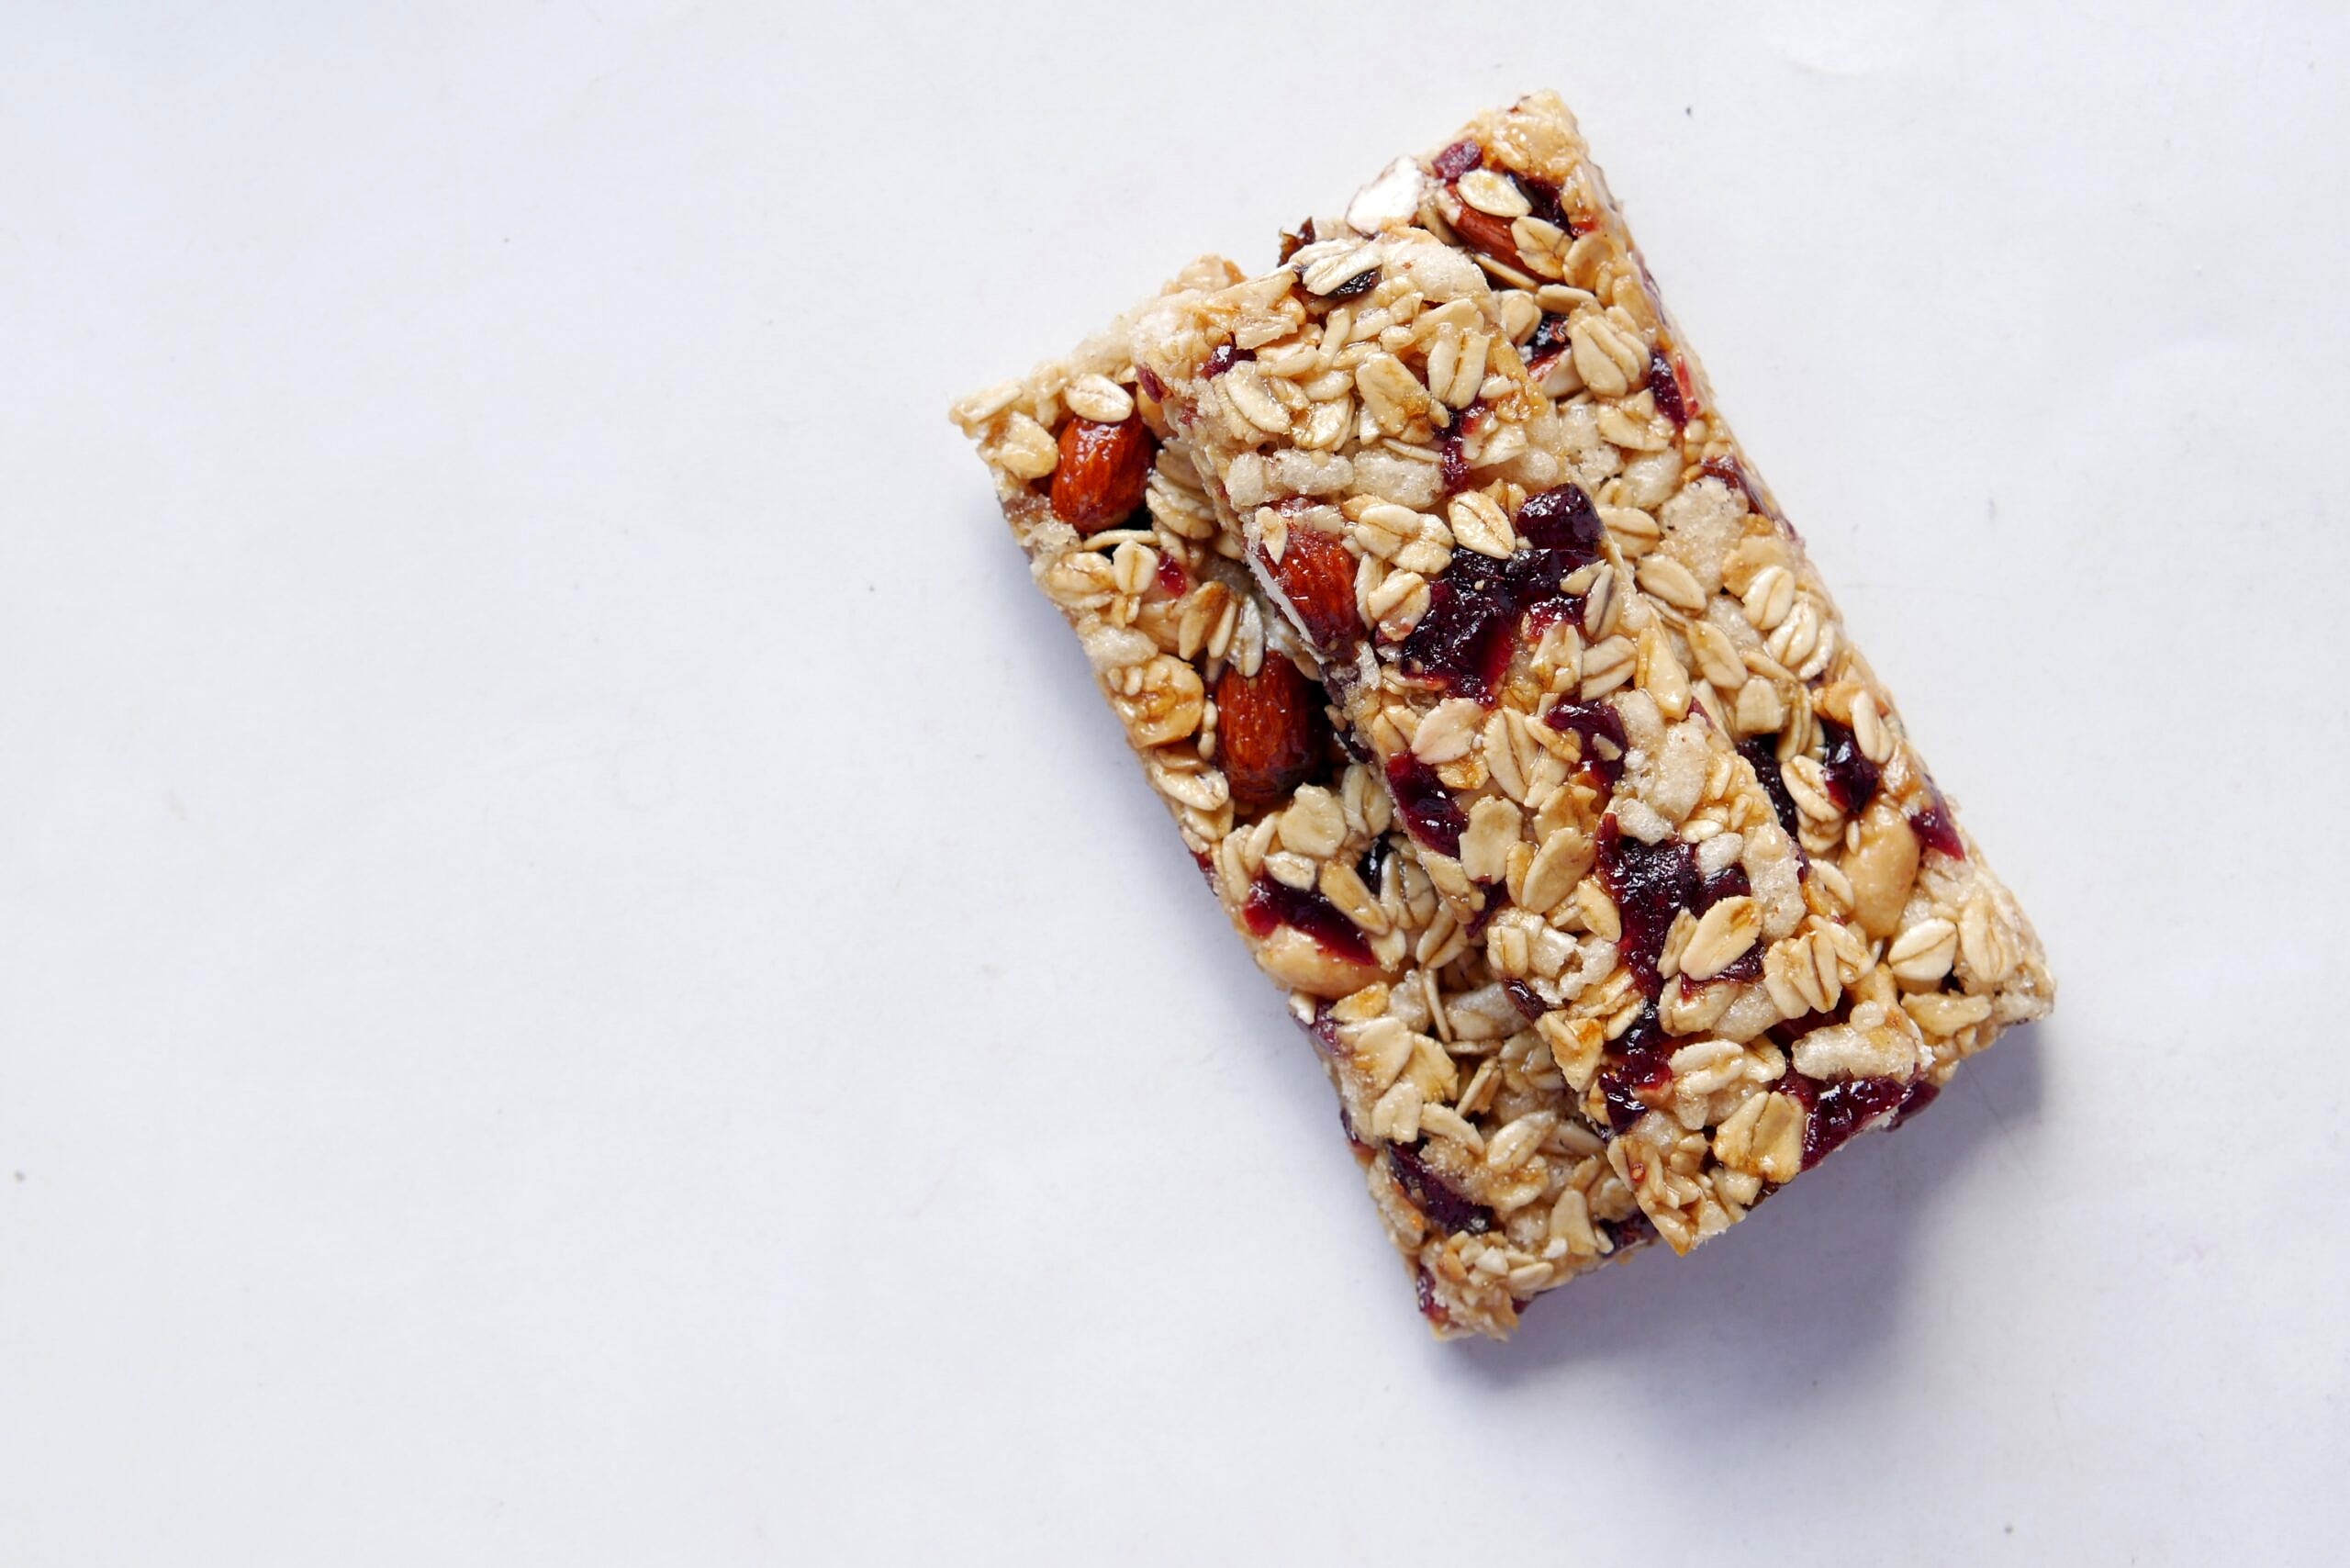 Two granola bars against a white background as an option to gain weight.